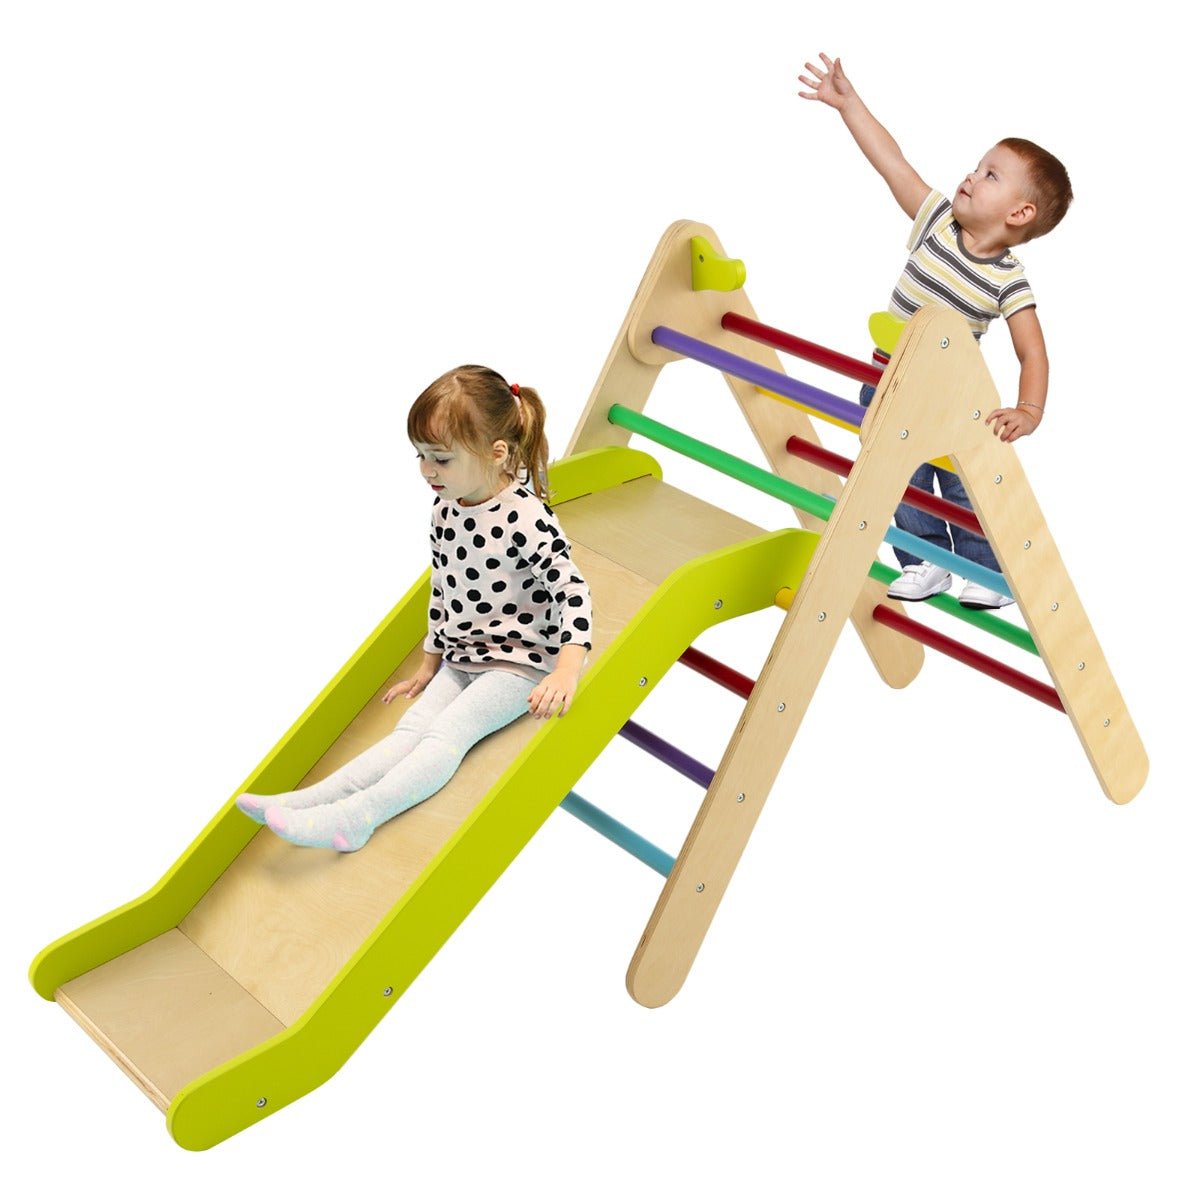 Adventure Wooden Climbing Triangle with Slide - Outdoor Fun for Kids